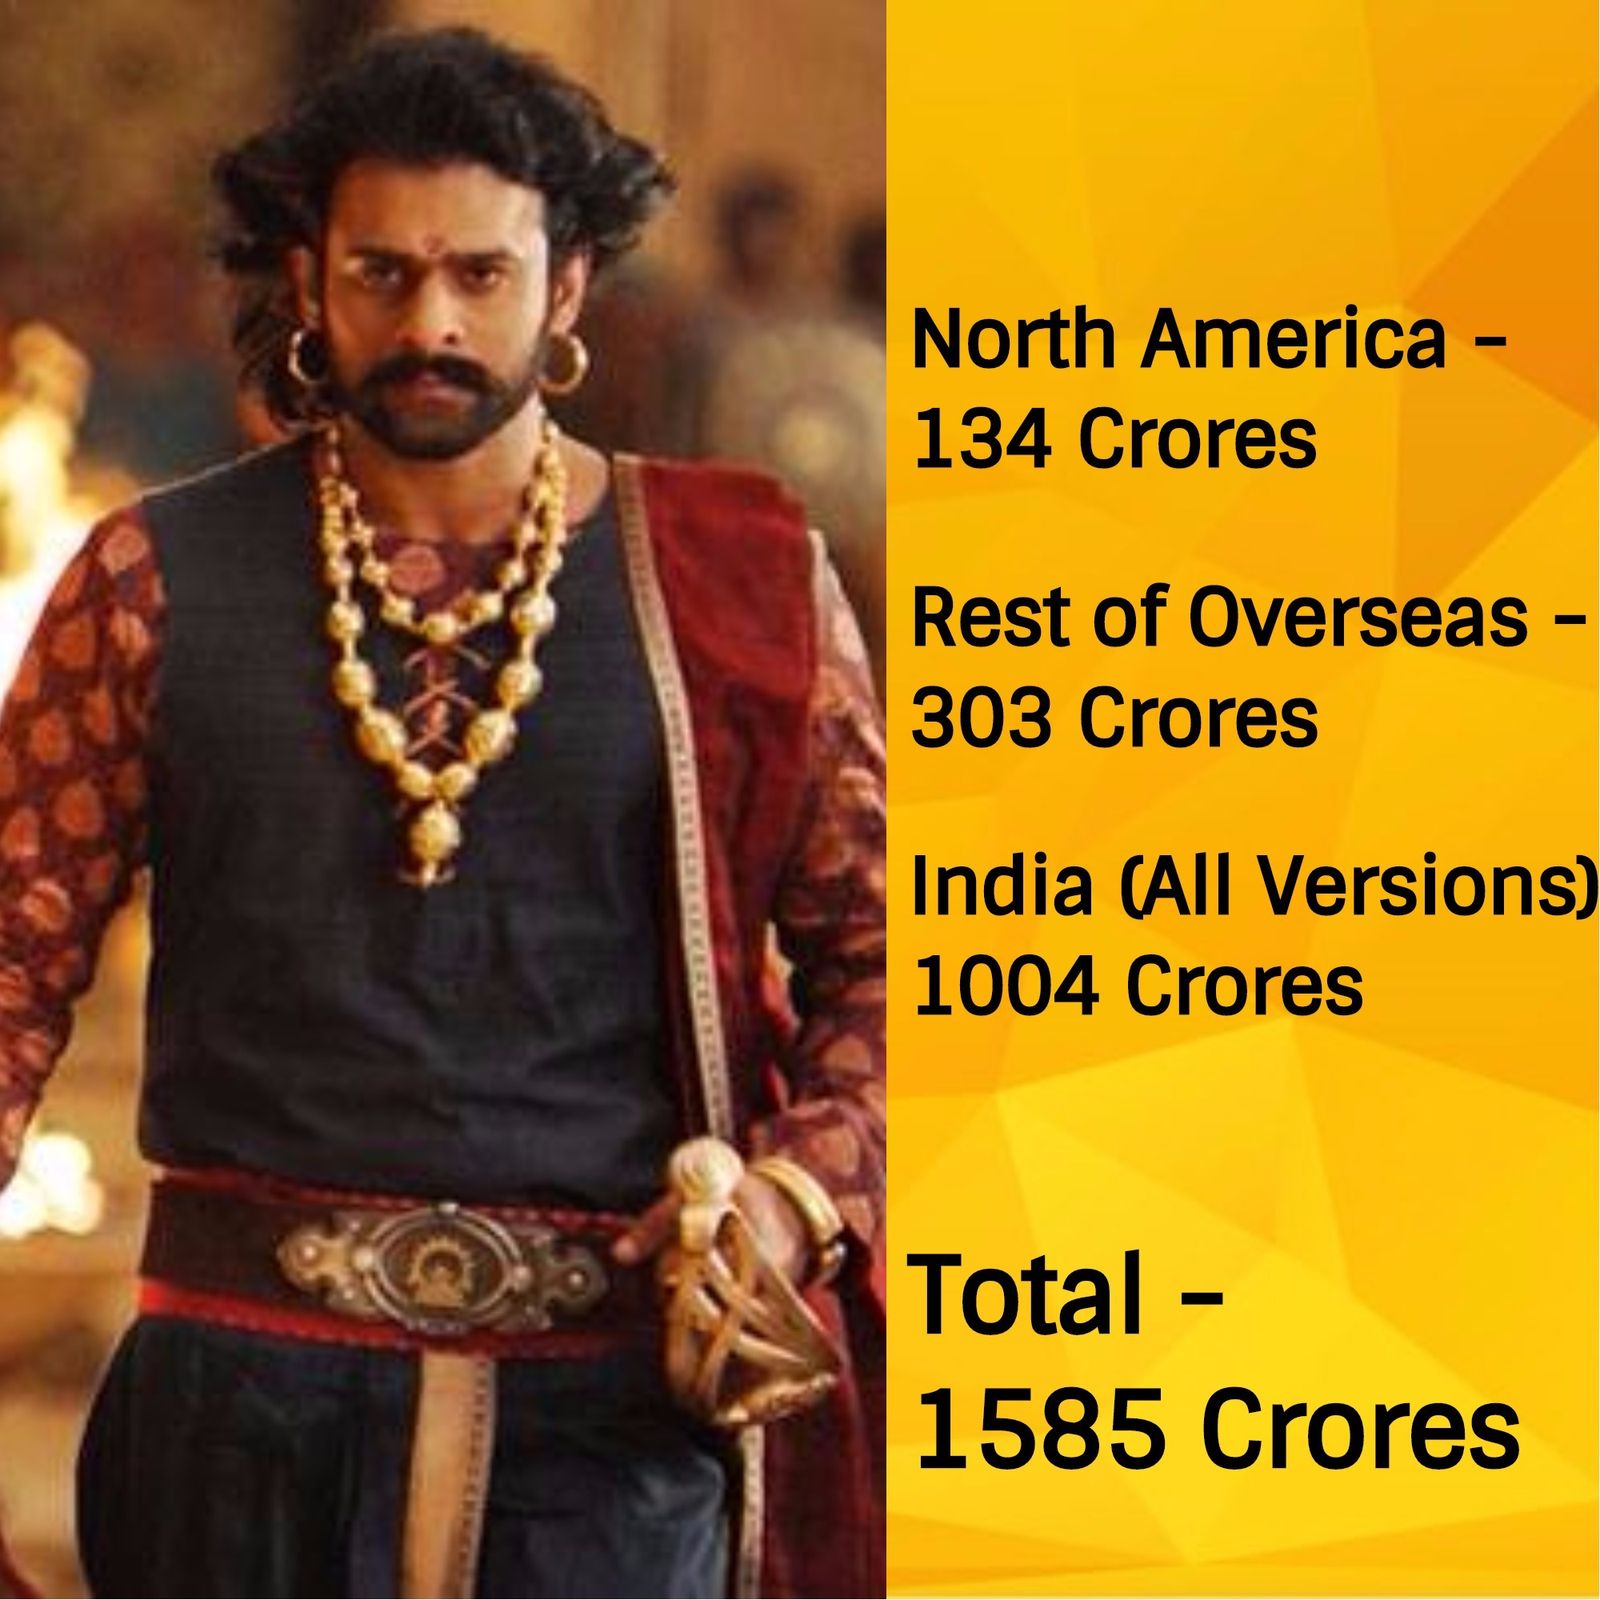 Baahubali 2 Vs Dangal - Which one will be the Highest Grossing Indian Movie Worldwide